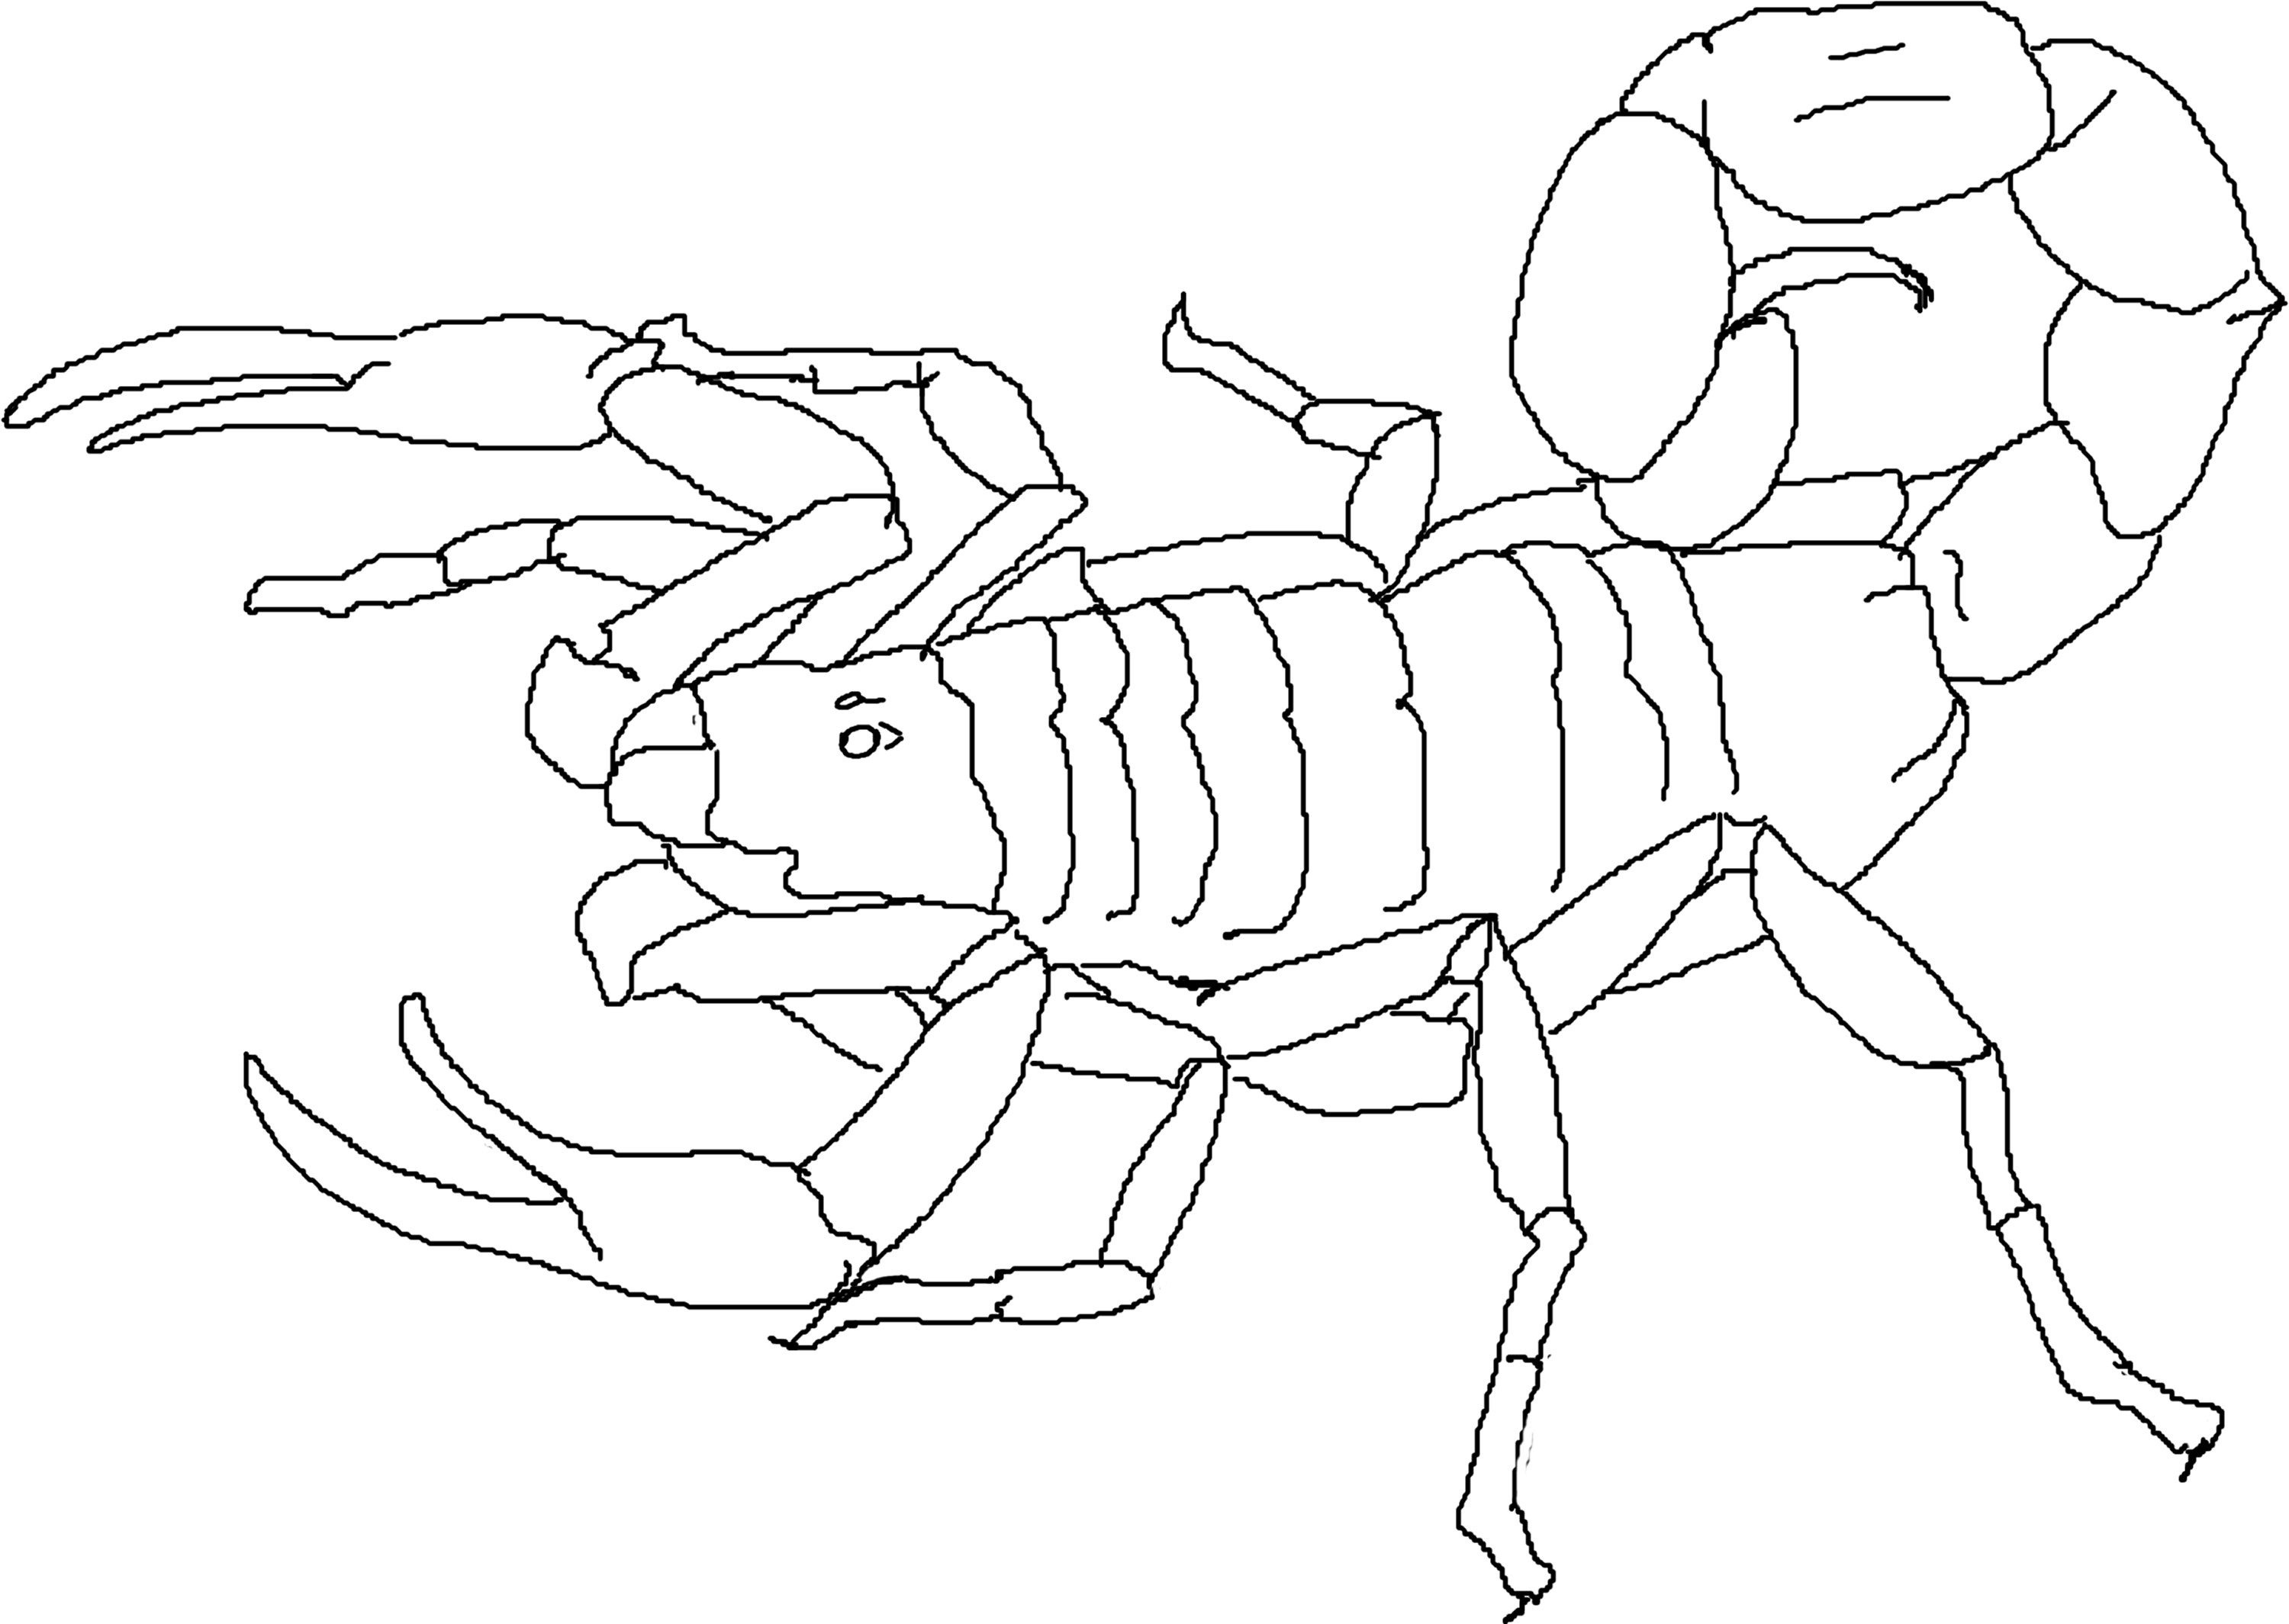 Scorpion Coloring Pages
 Free Printable Scorpion Coloring Pages For Kids